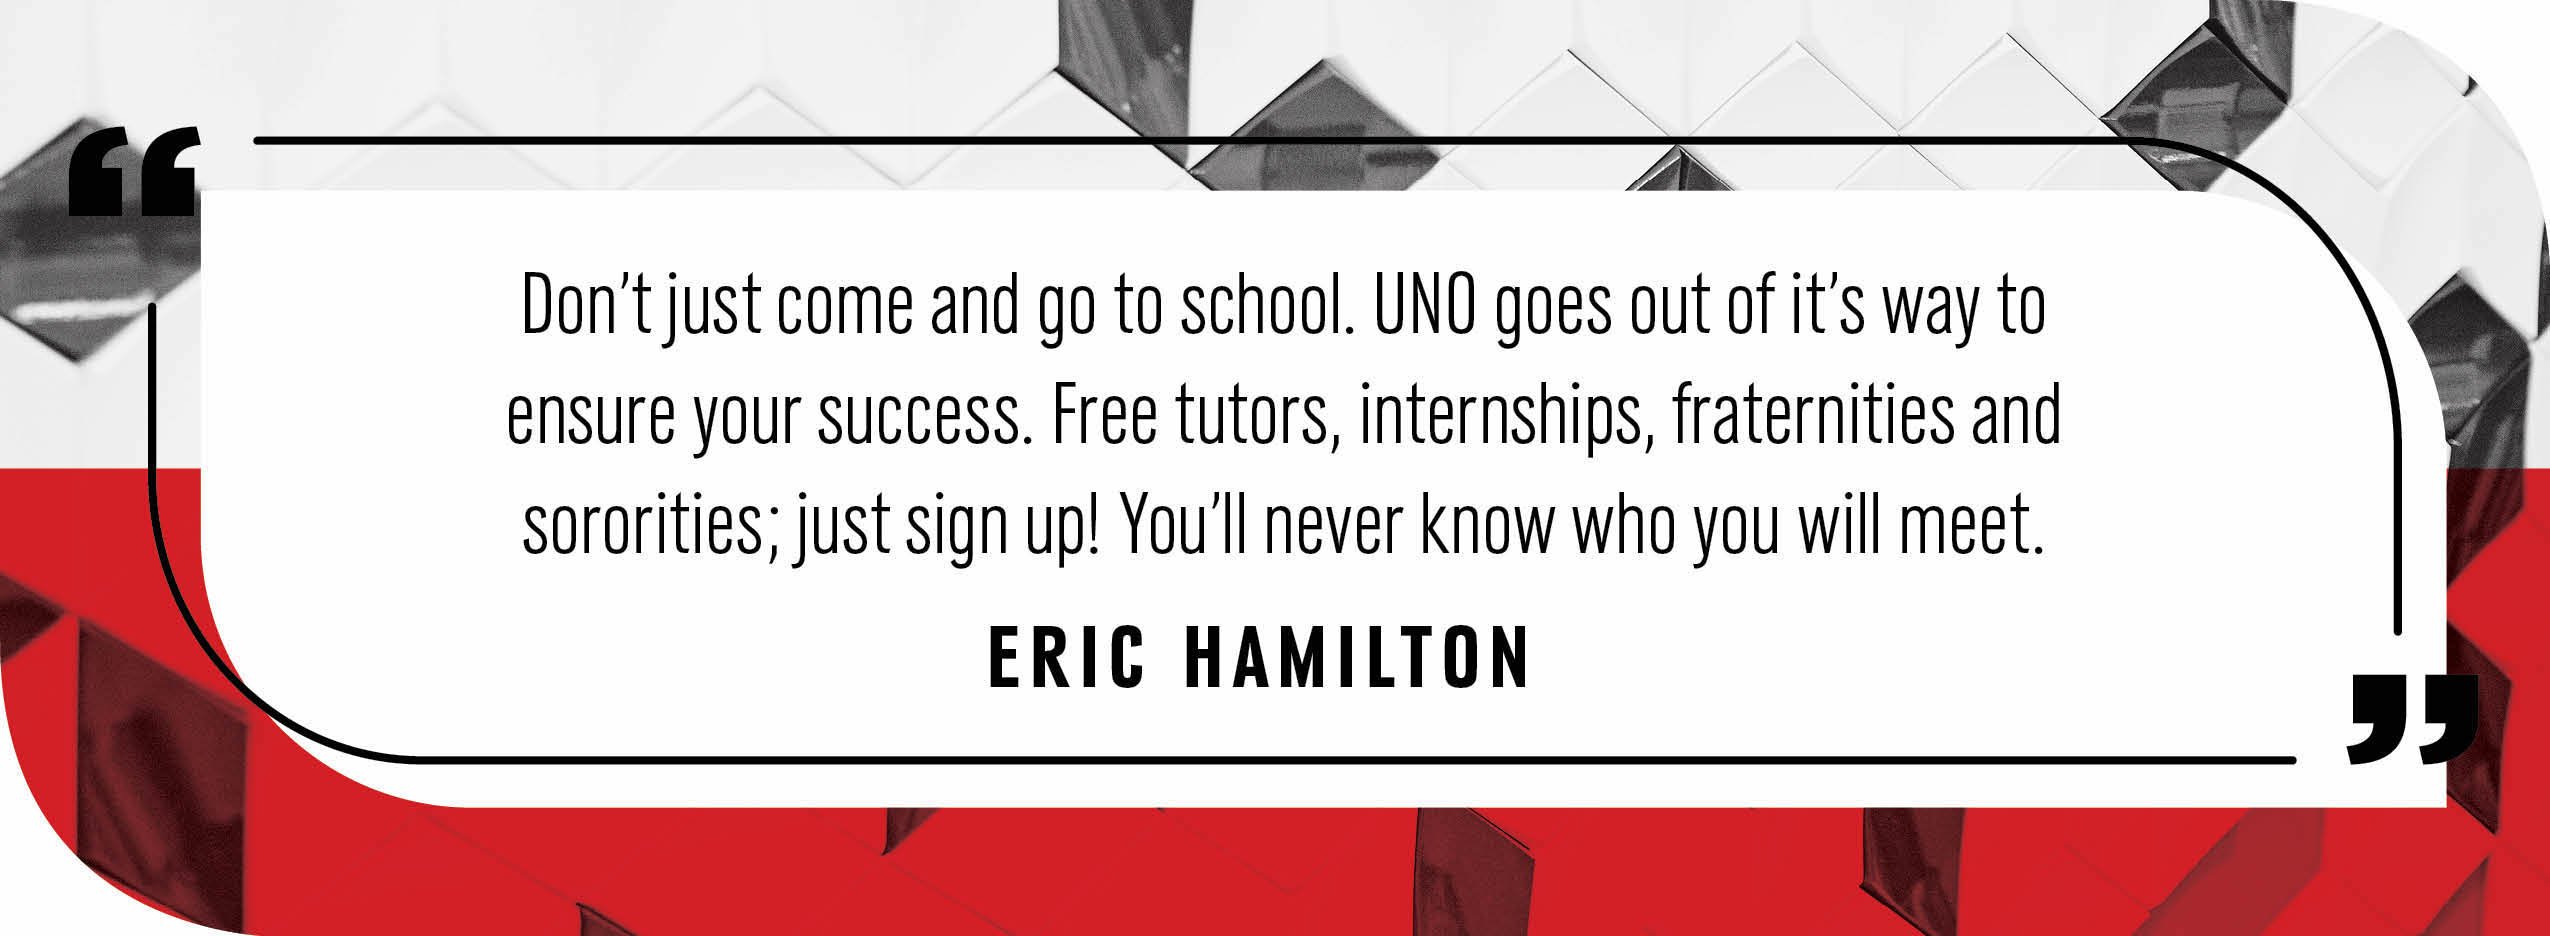 Quote by Eric Hamilton: "Don't just come and go to school. UNO goes out of it's way to ensure your success. Free tutors, internships, fraternities and sororities; just sign up! You'll never know who you will meet."